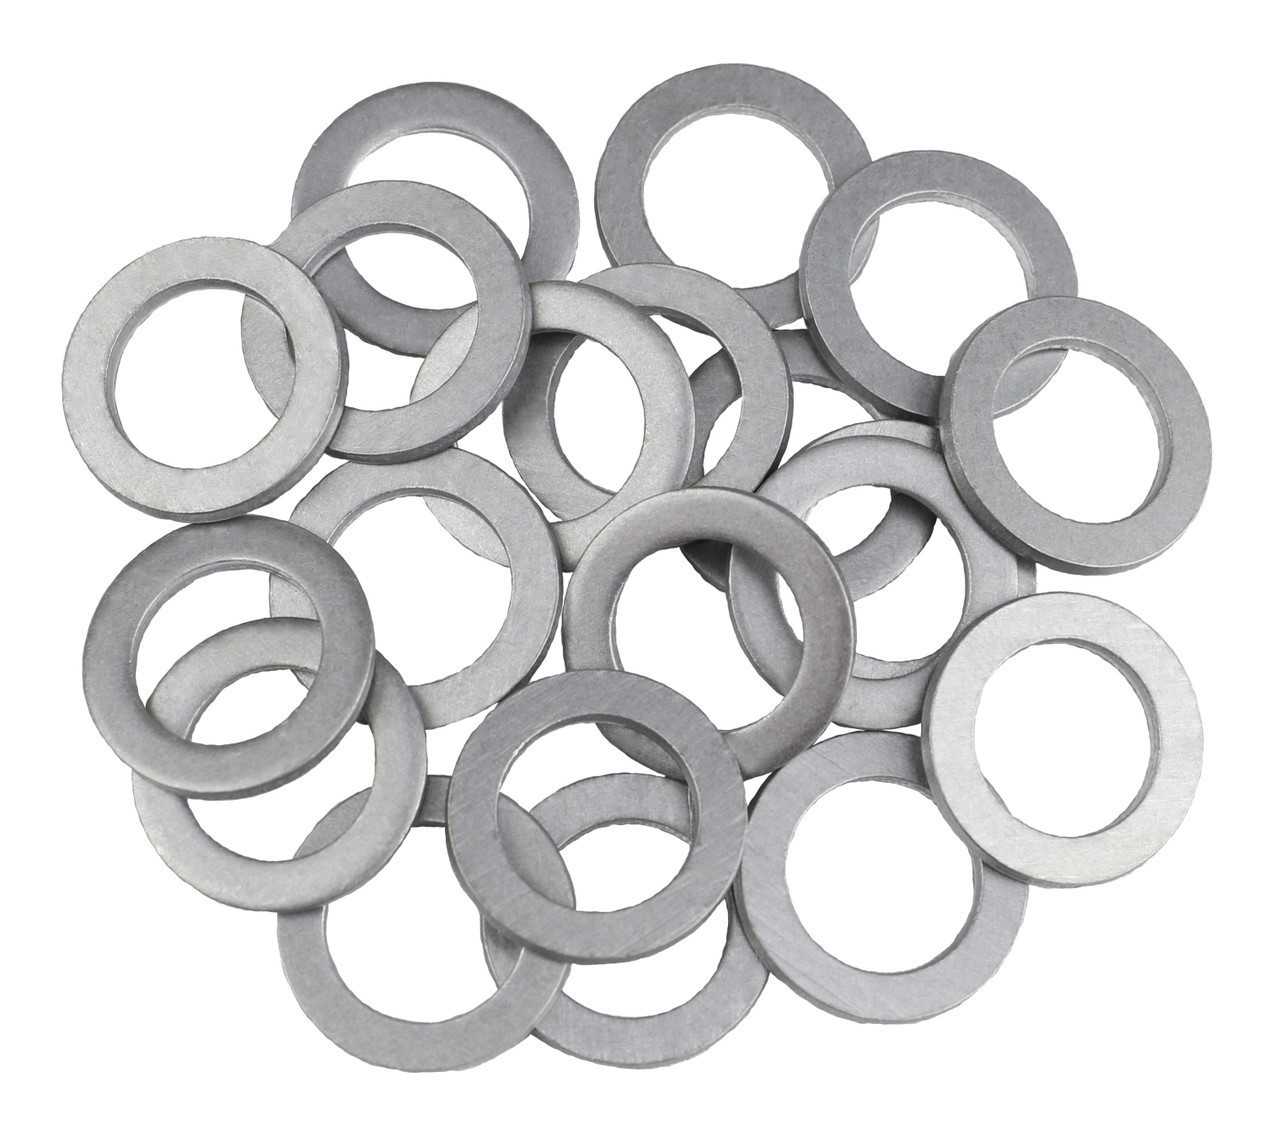 Jeep Wrangler Aluminum Oil Crush Washers/Drain Plug Seal Ring Gasket Kit - 2021-2023 - 6.4 Liter - 8 Cylinder - MADE IN USA